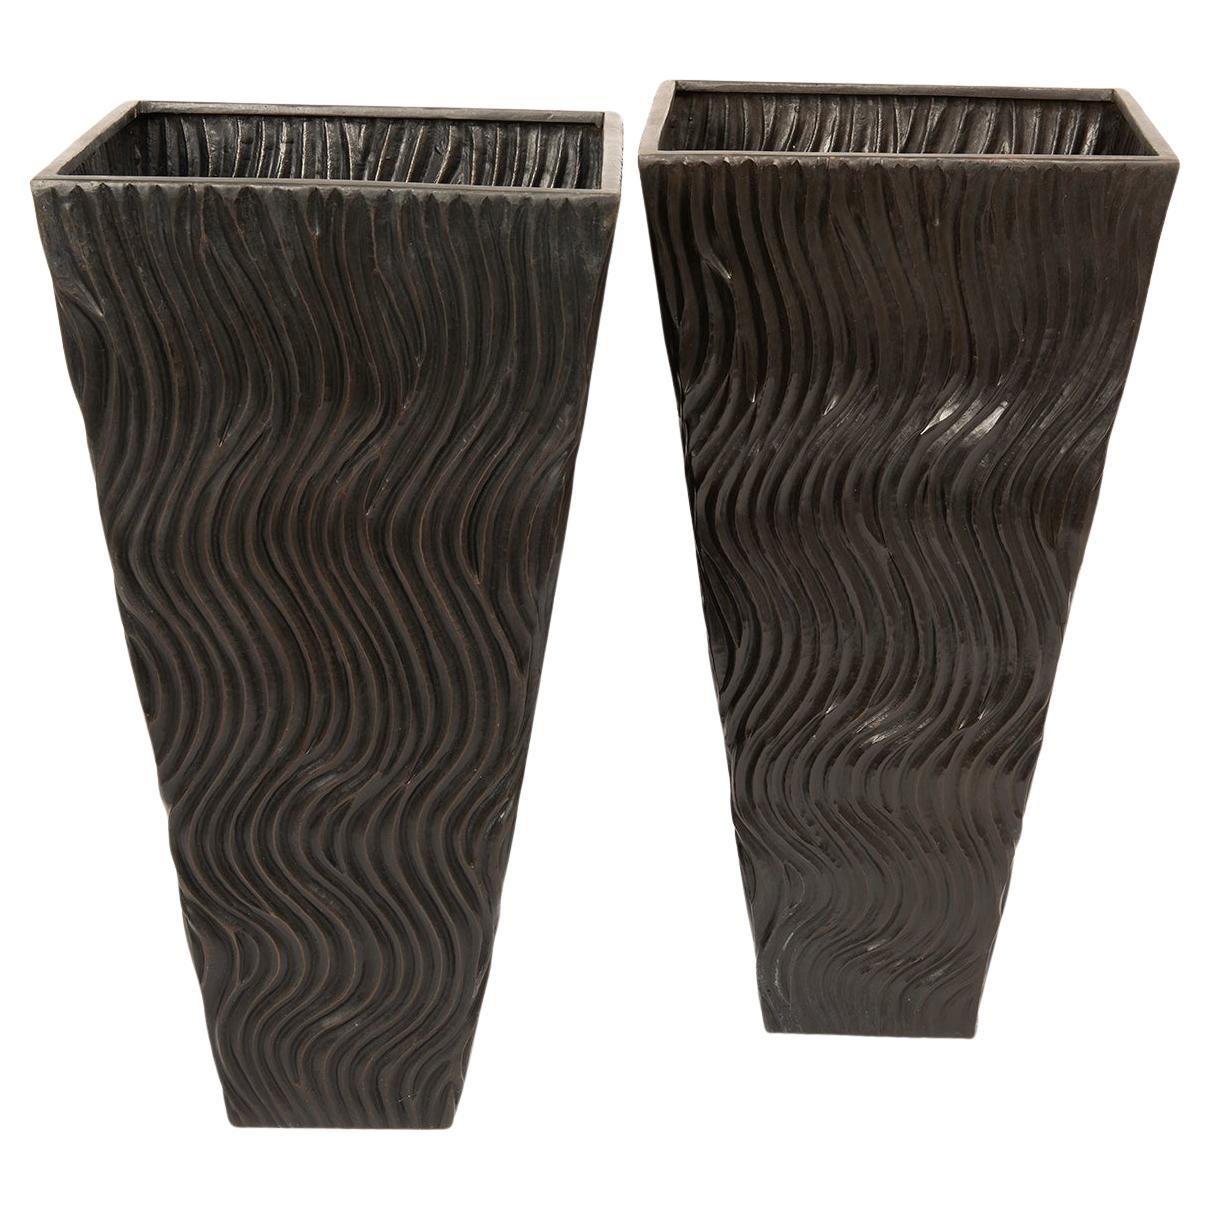 Robert Kuo, a Pair of Repousse Copper Sculpture Vases, World Famous, circa 2010